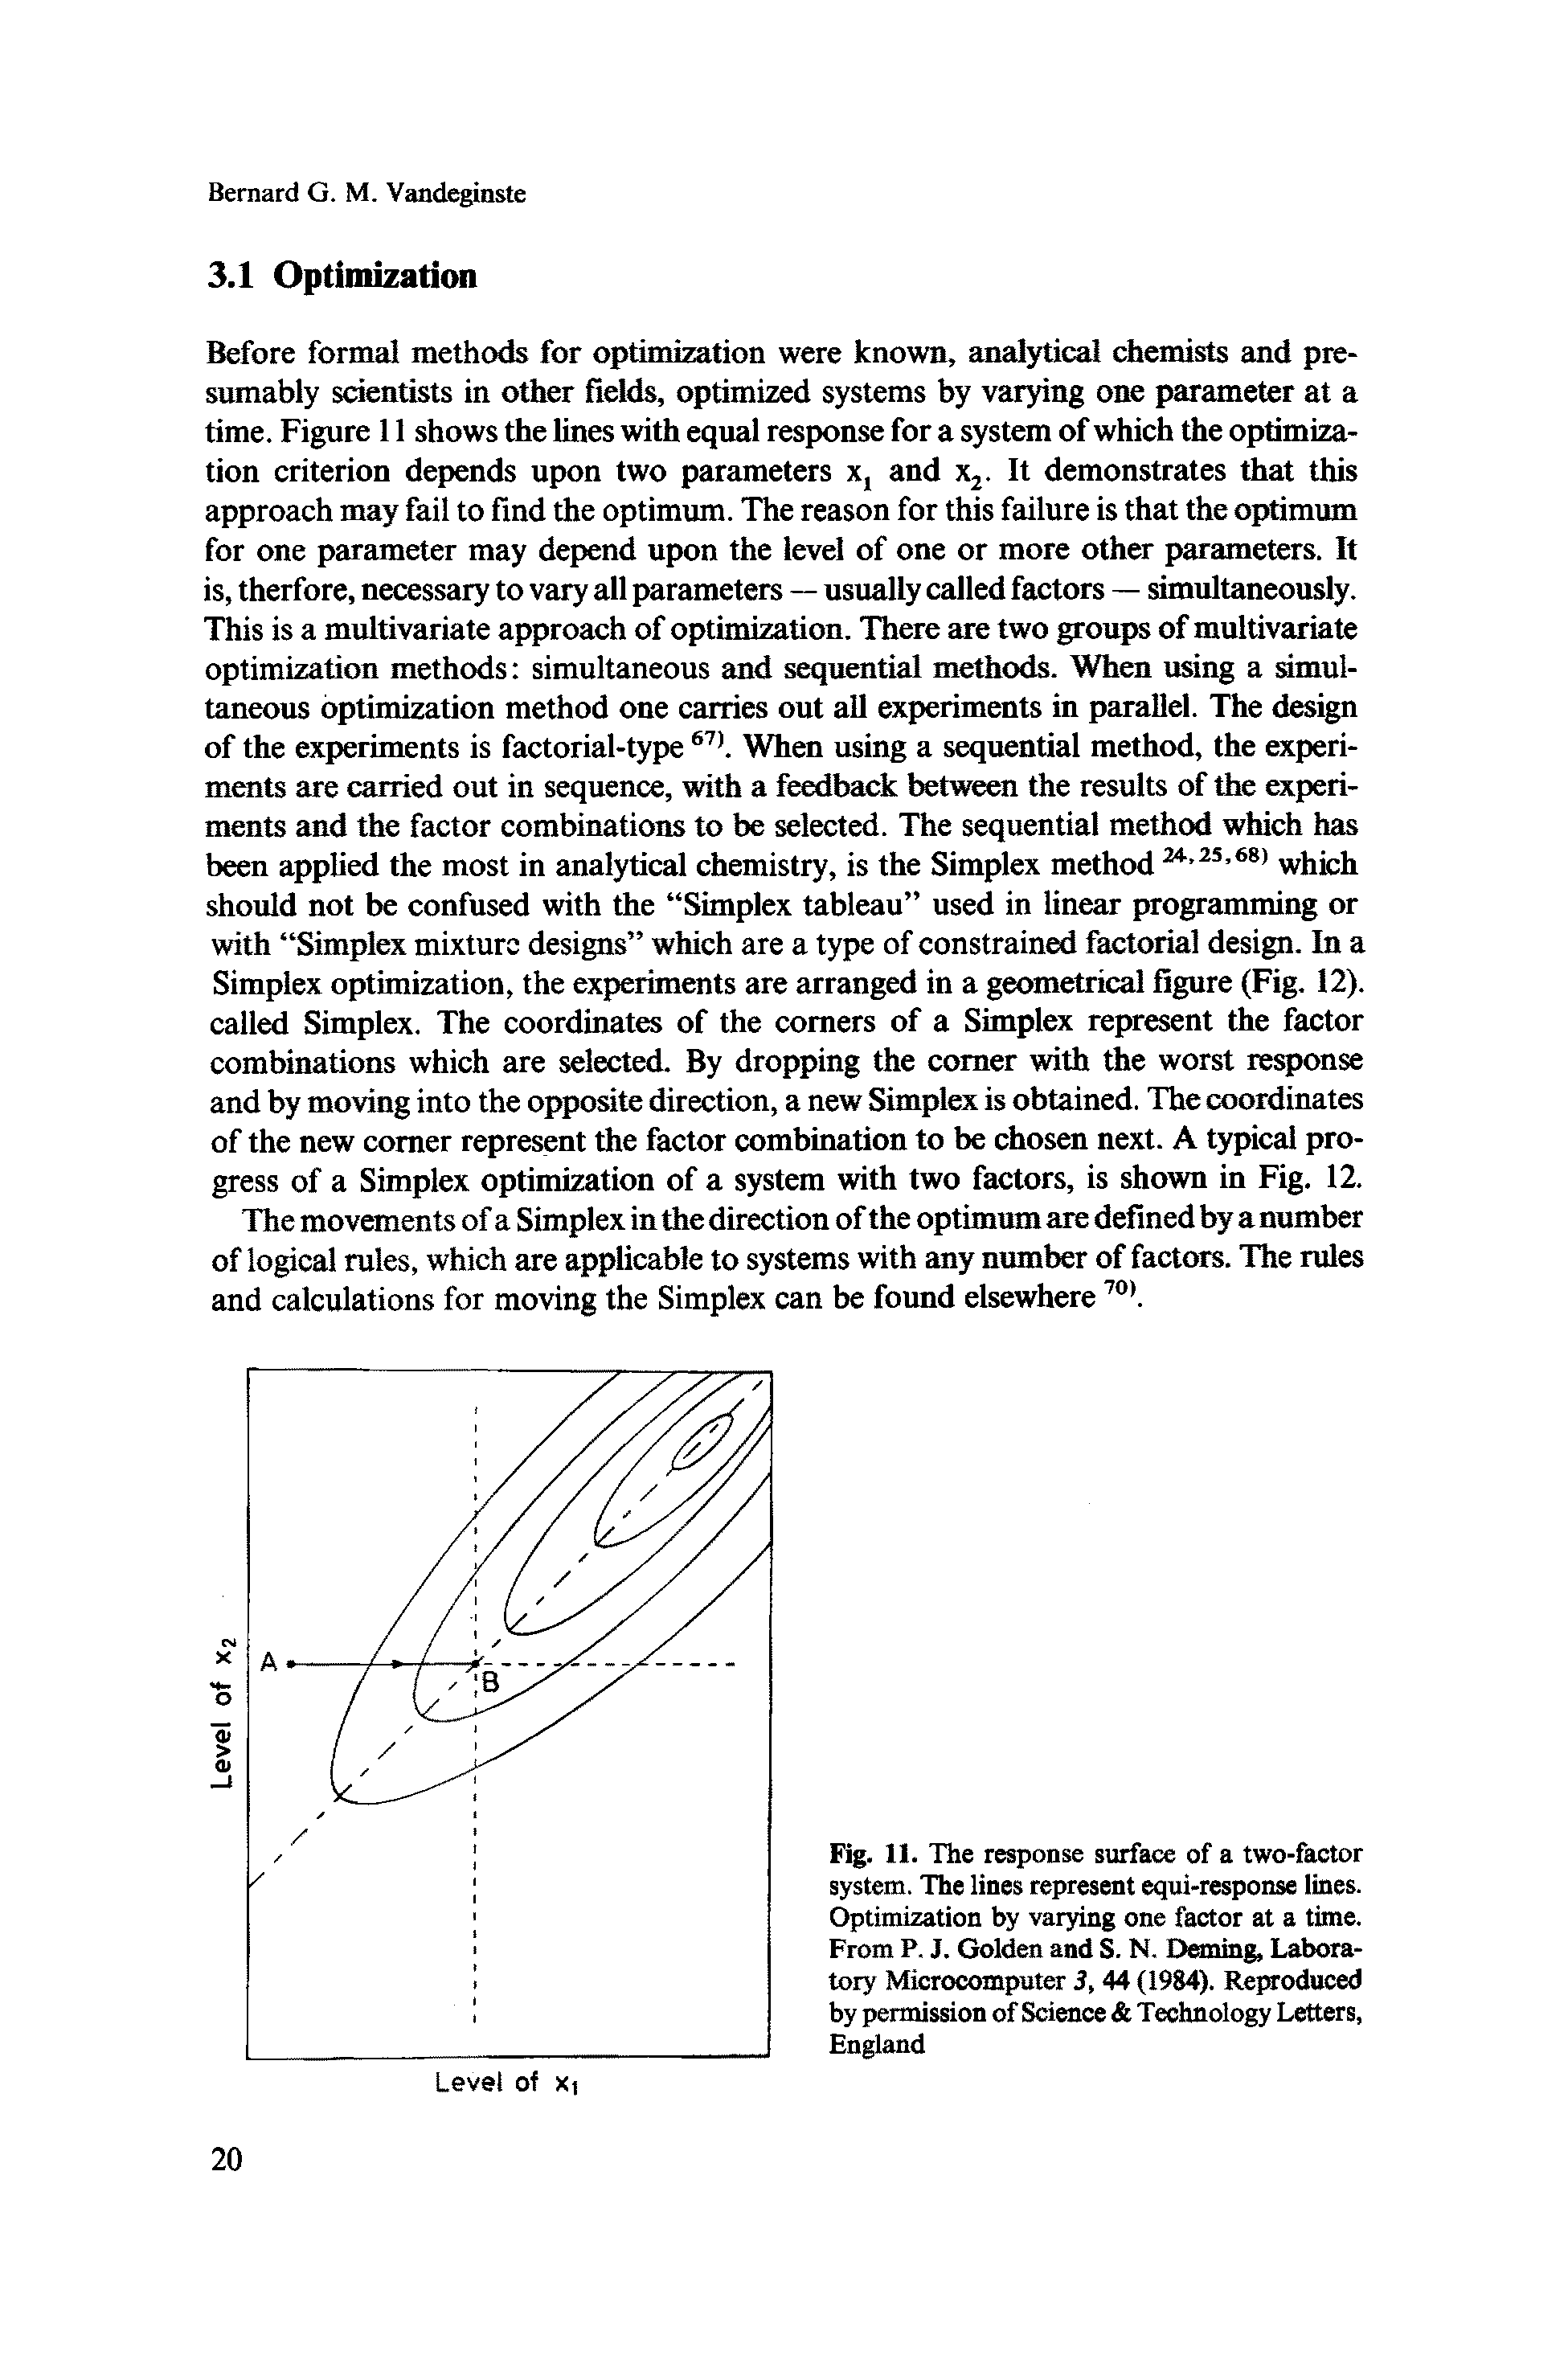 Fig. 11. The response surface of a two-factor system. The lines represent equi-response lines. Optimization by varying one factor at a time. From P. J. Golden and S. N. Deming, Laboratory Microcomputer 3, 44 (1984). Reproduced by permission of Science Technology Letters, England...